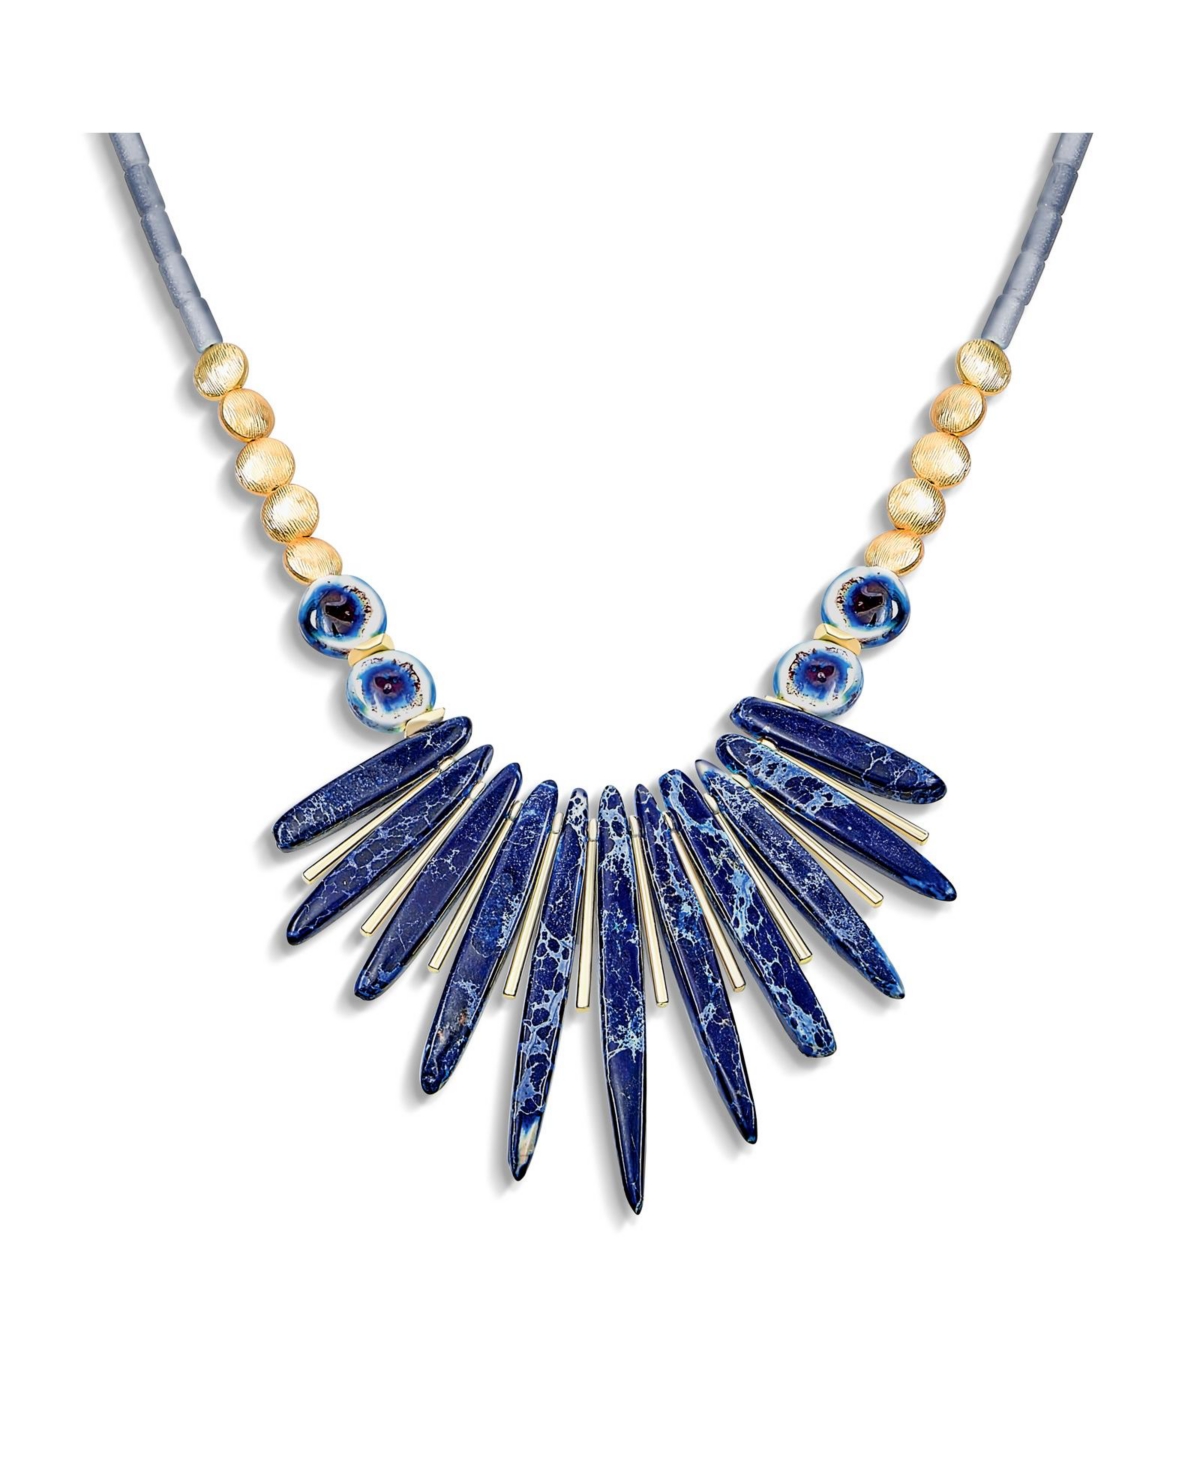 Blue Peck Organic Faceted Beads Gemstone Irregular Stone Bib Fan Statement Collar Choker Necklaces Western Jewelry For Women Gold Plated